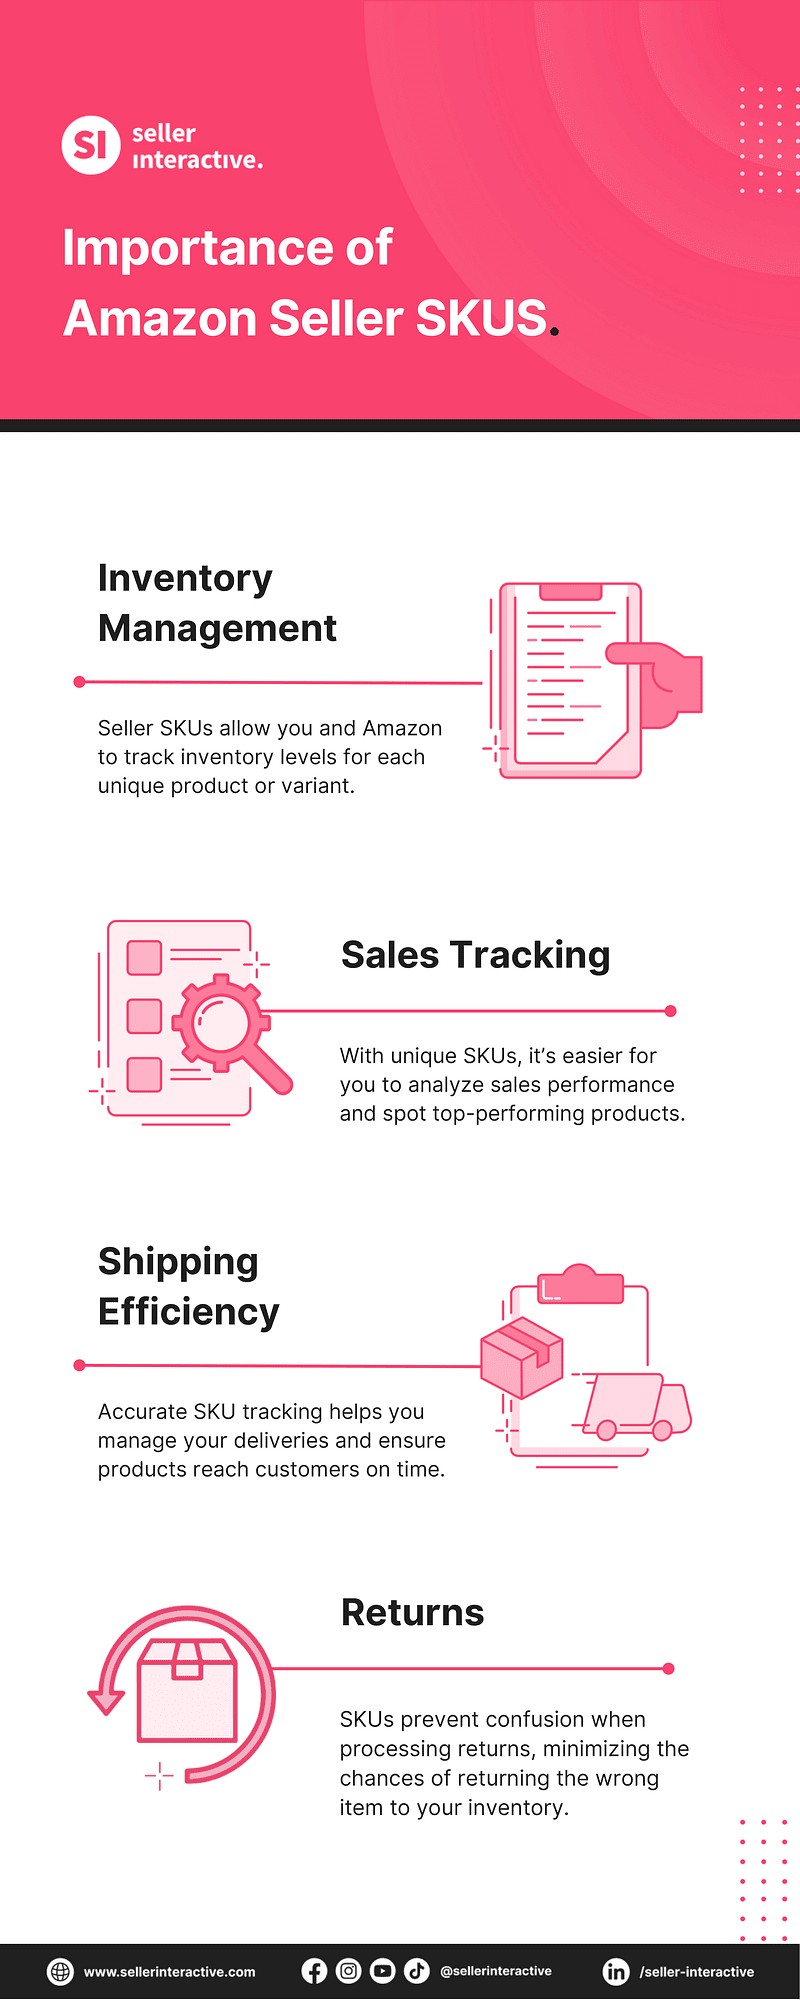 infographic - importance of amazon seller skus - inventory management, sales tracking, shopping efficiency, returns